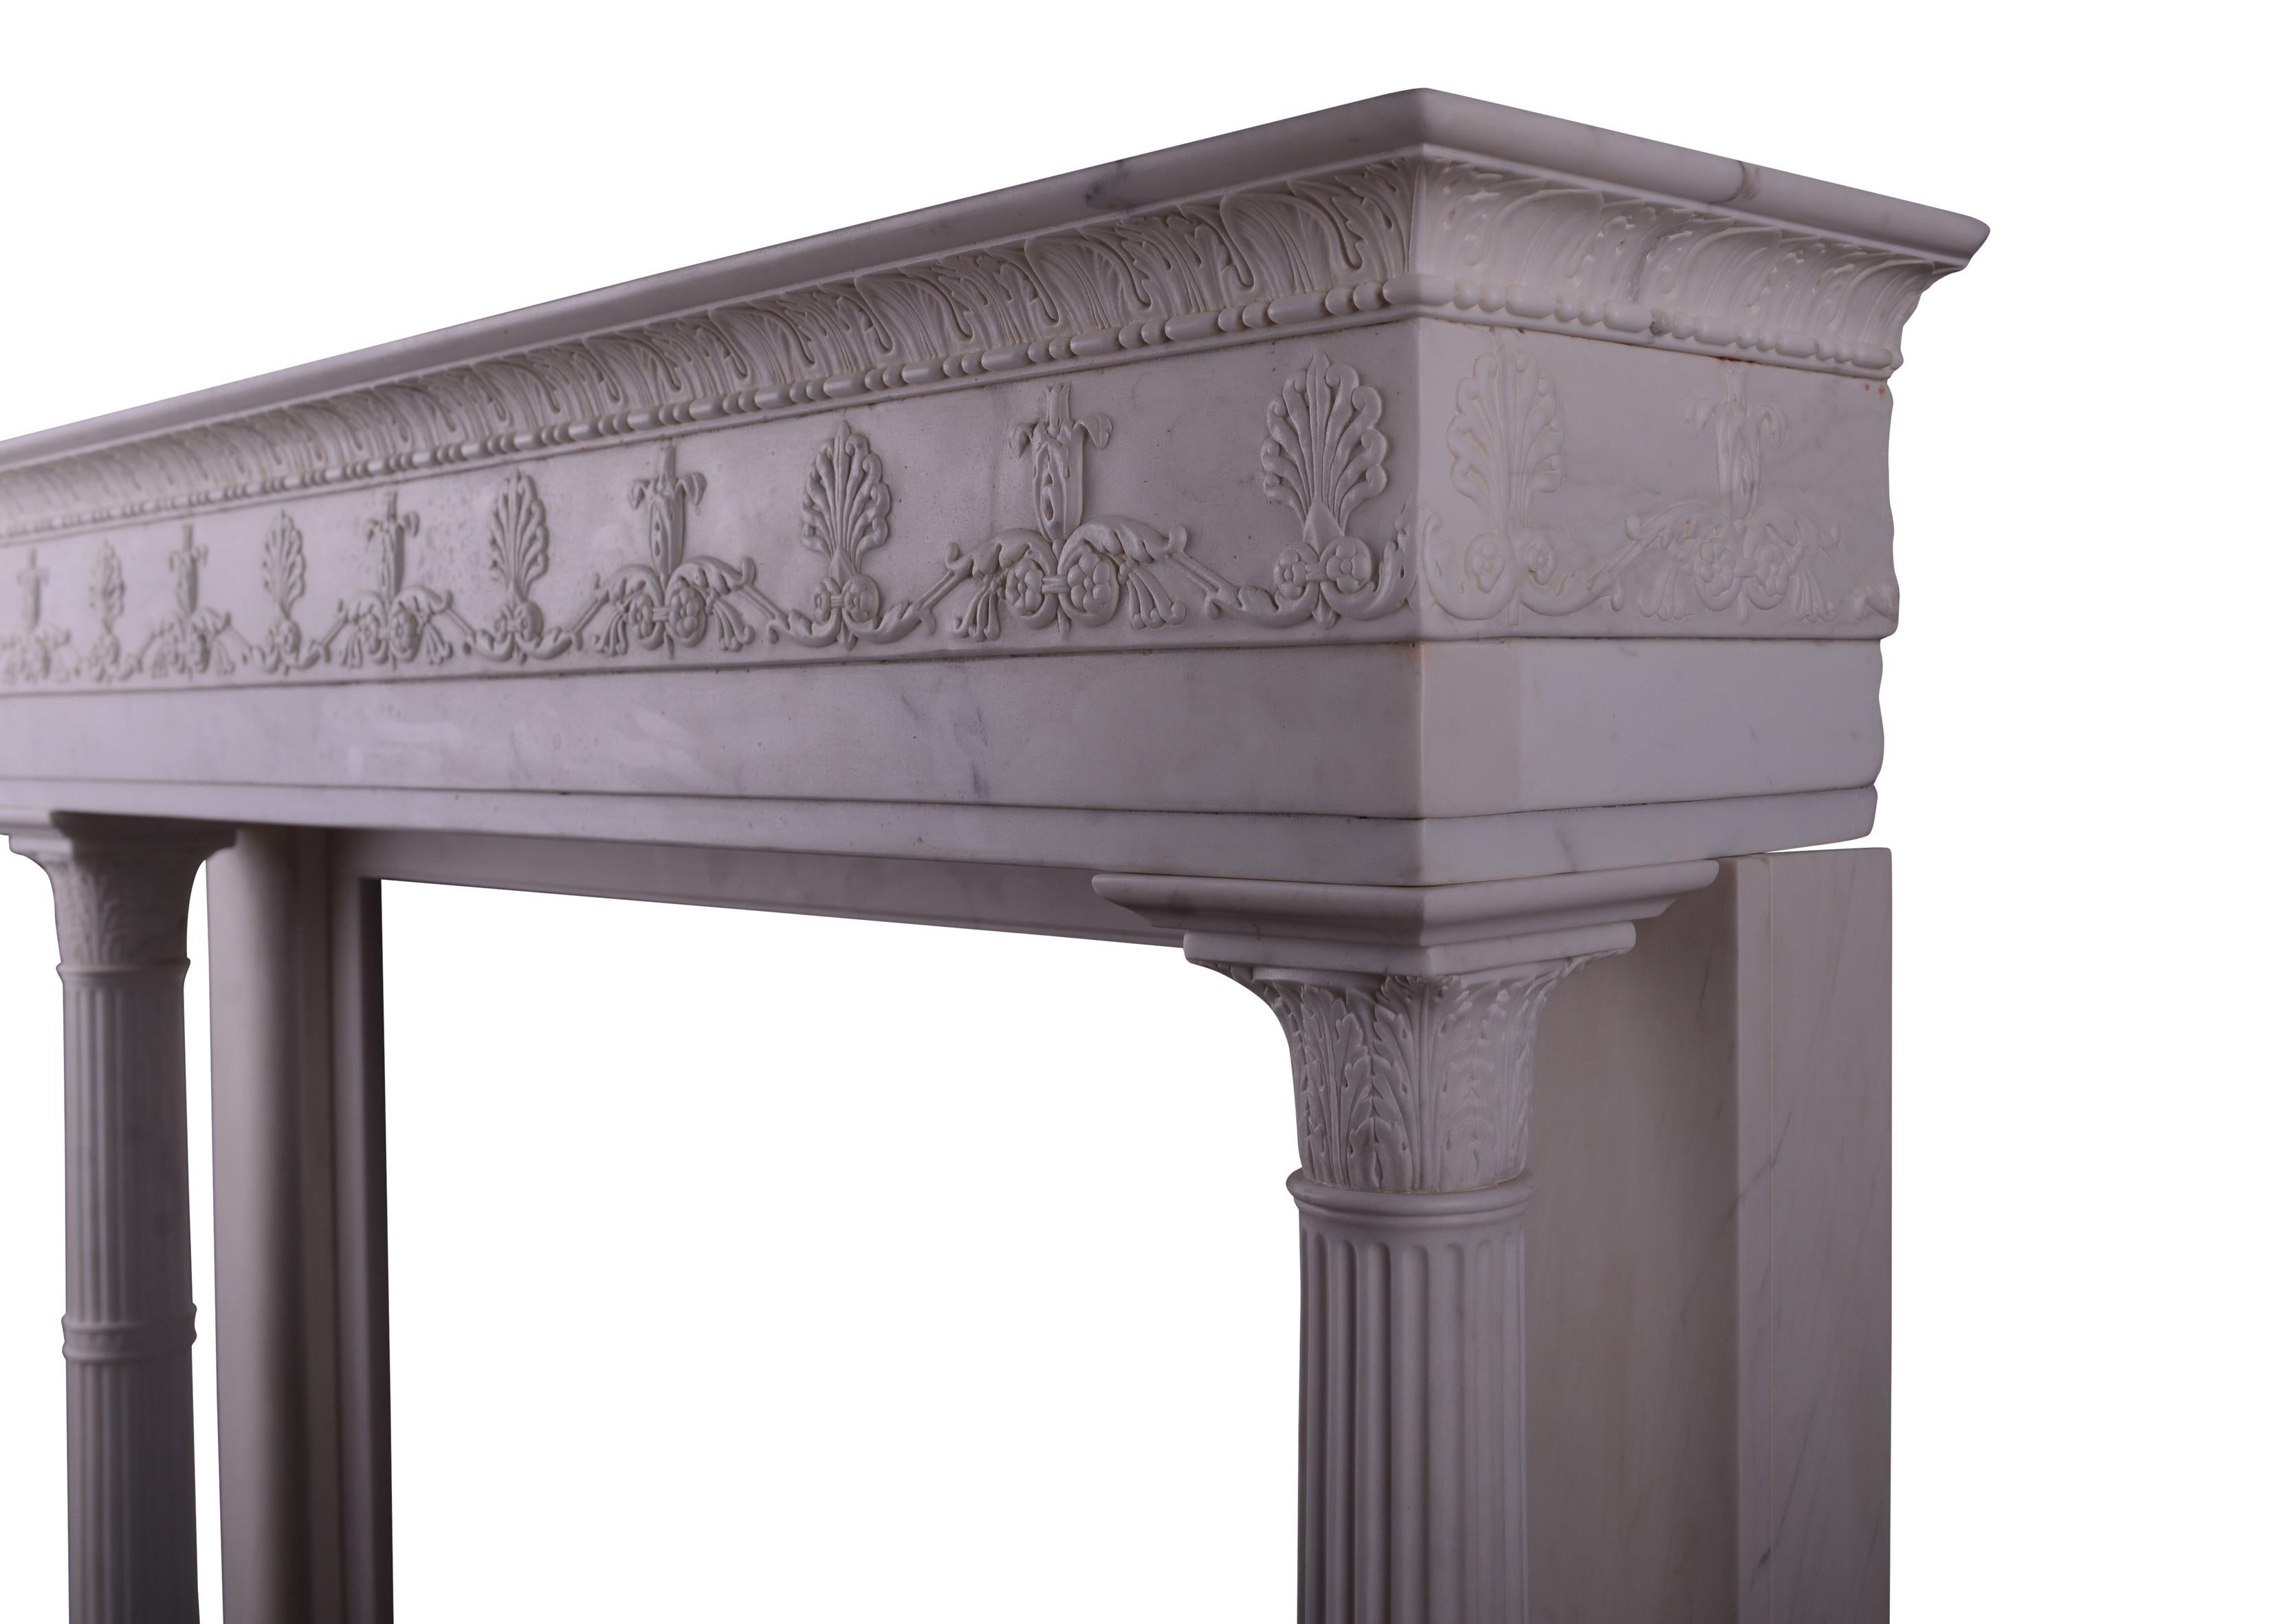 English Period Regency Fireplace in Statuary White Marble